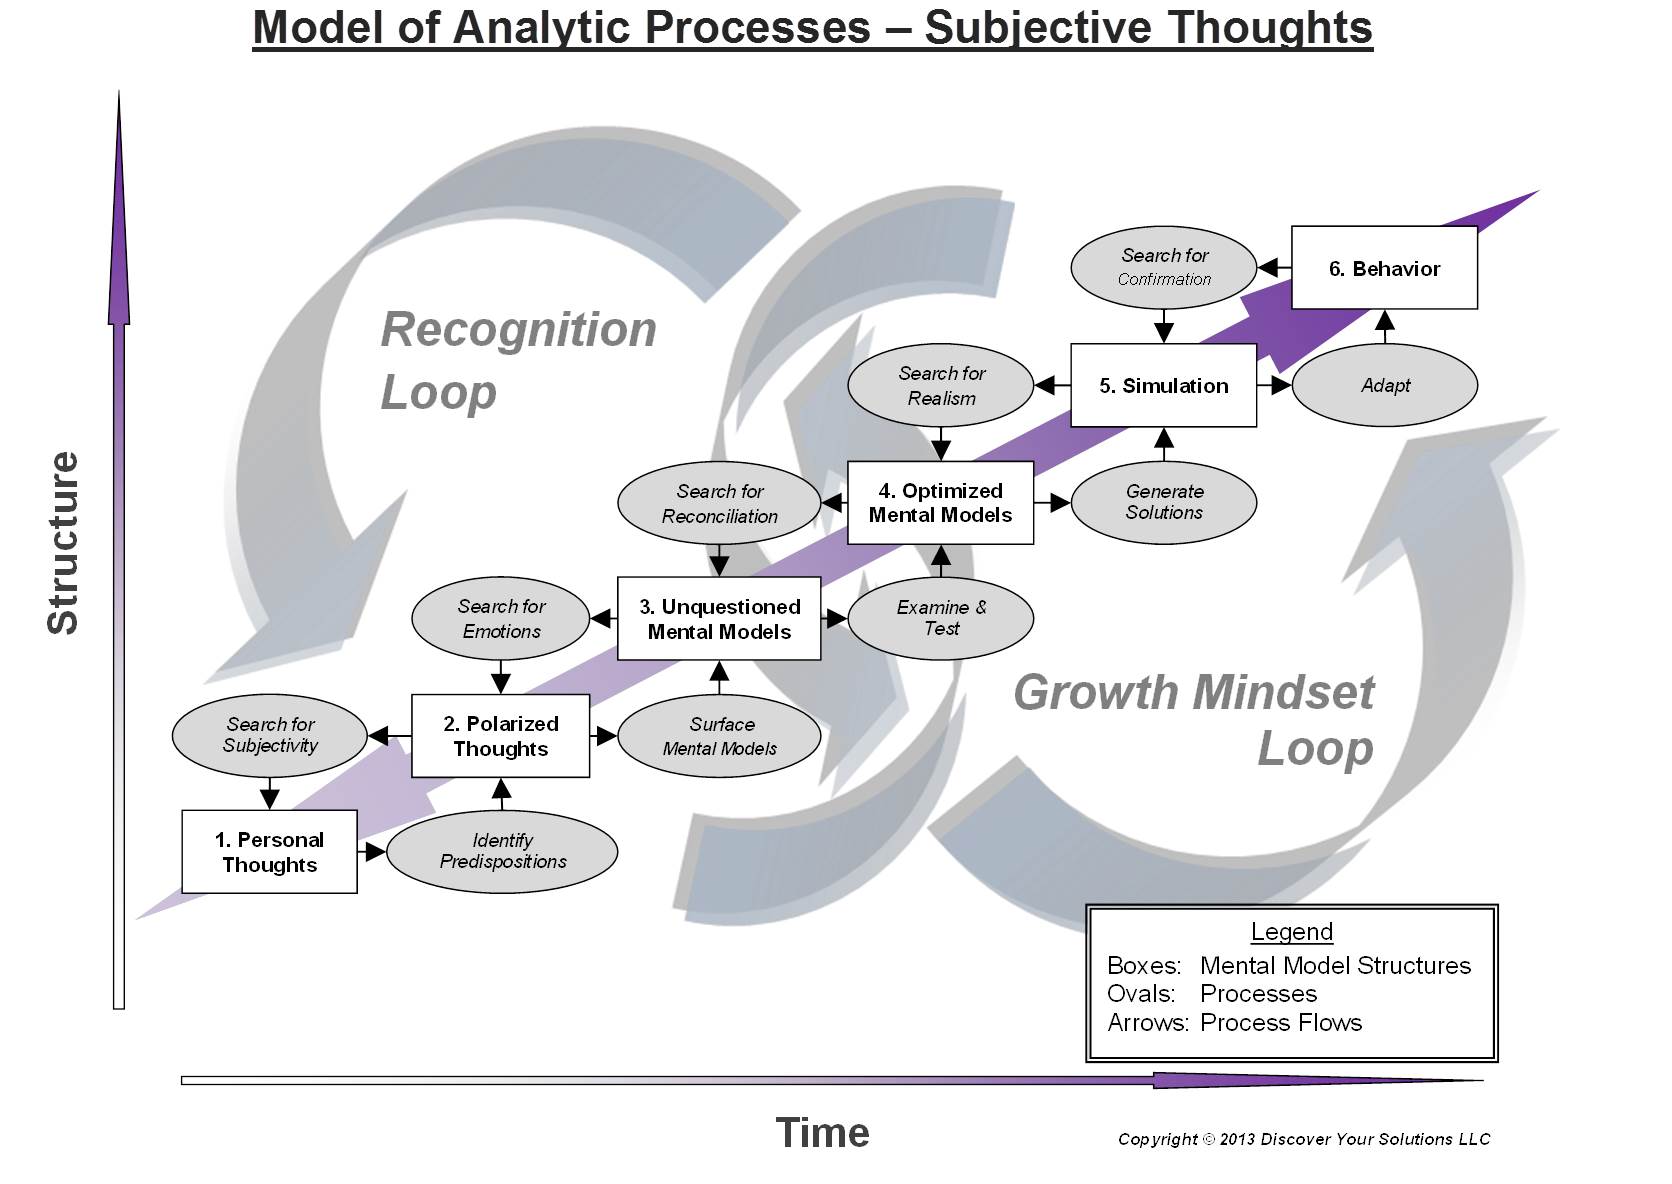 Model of Analytic Processes - Subjective Thoughts